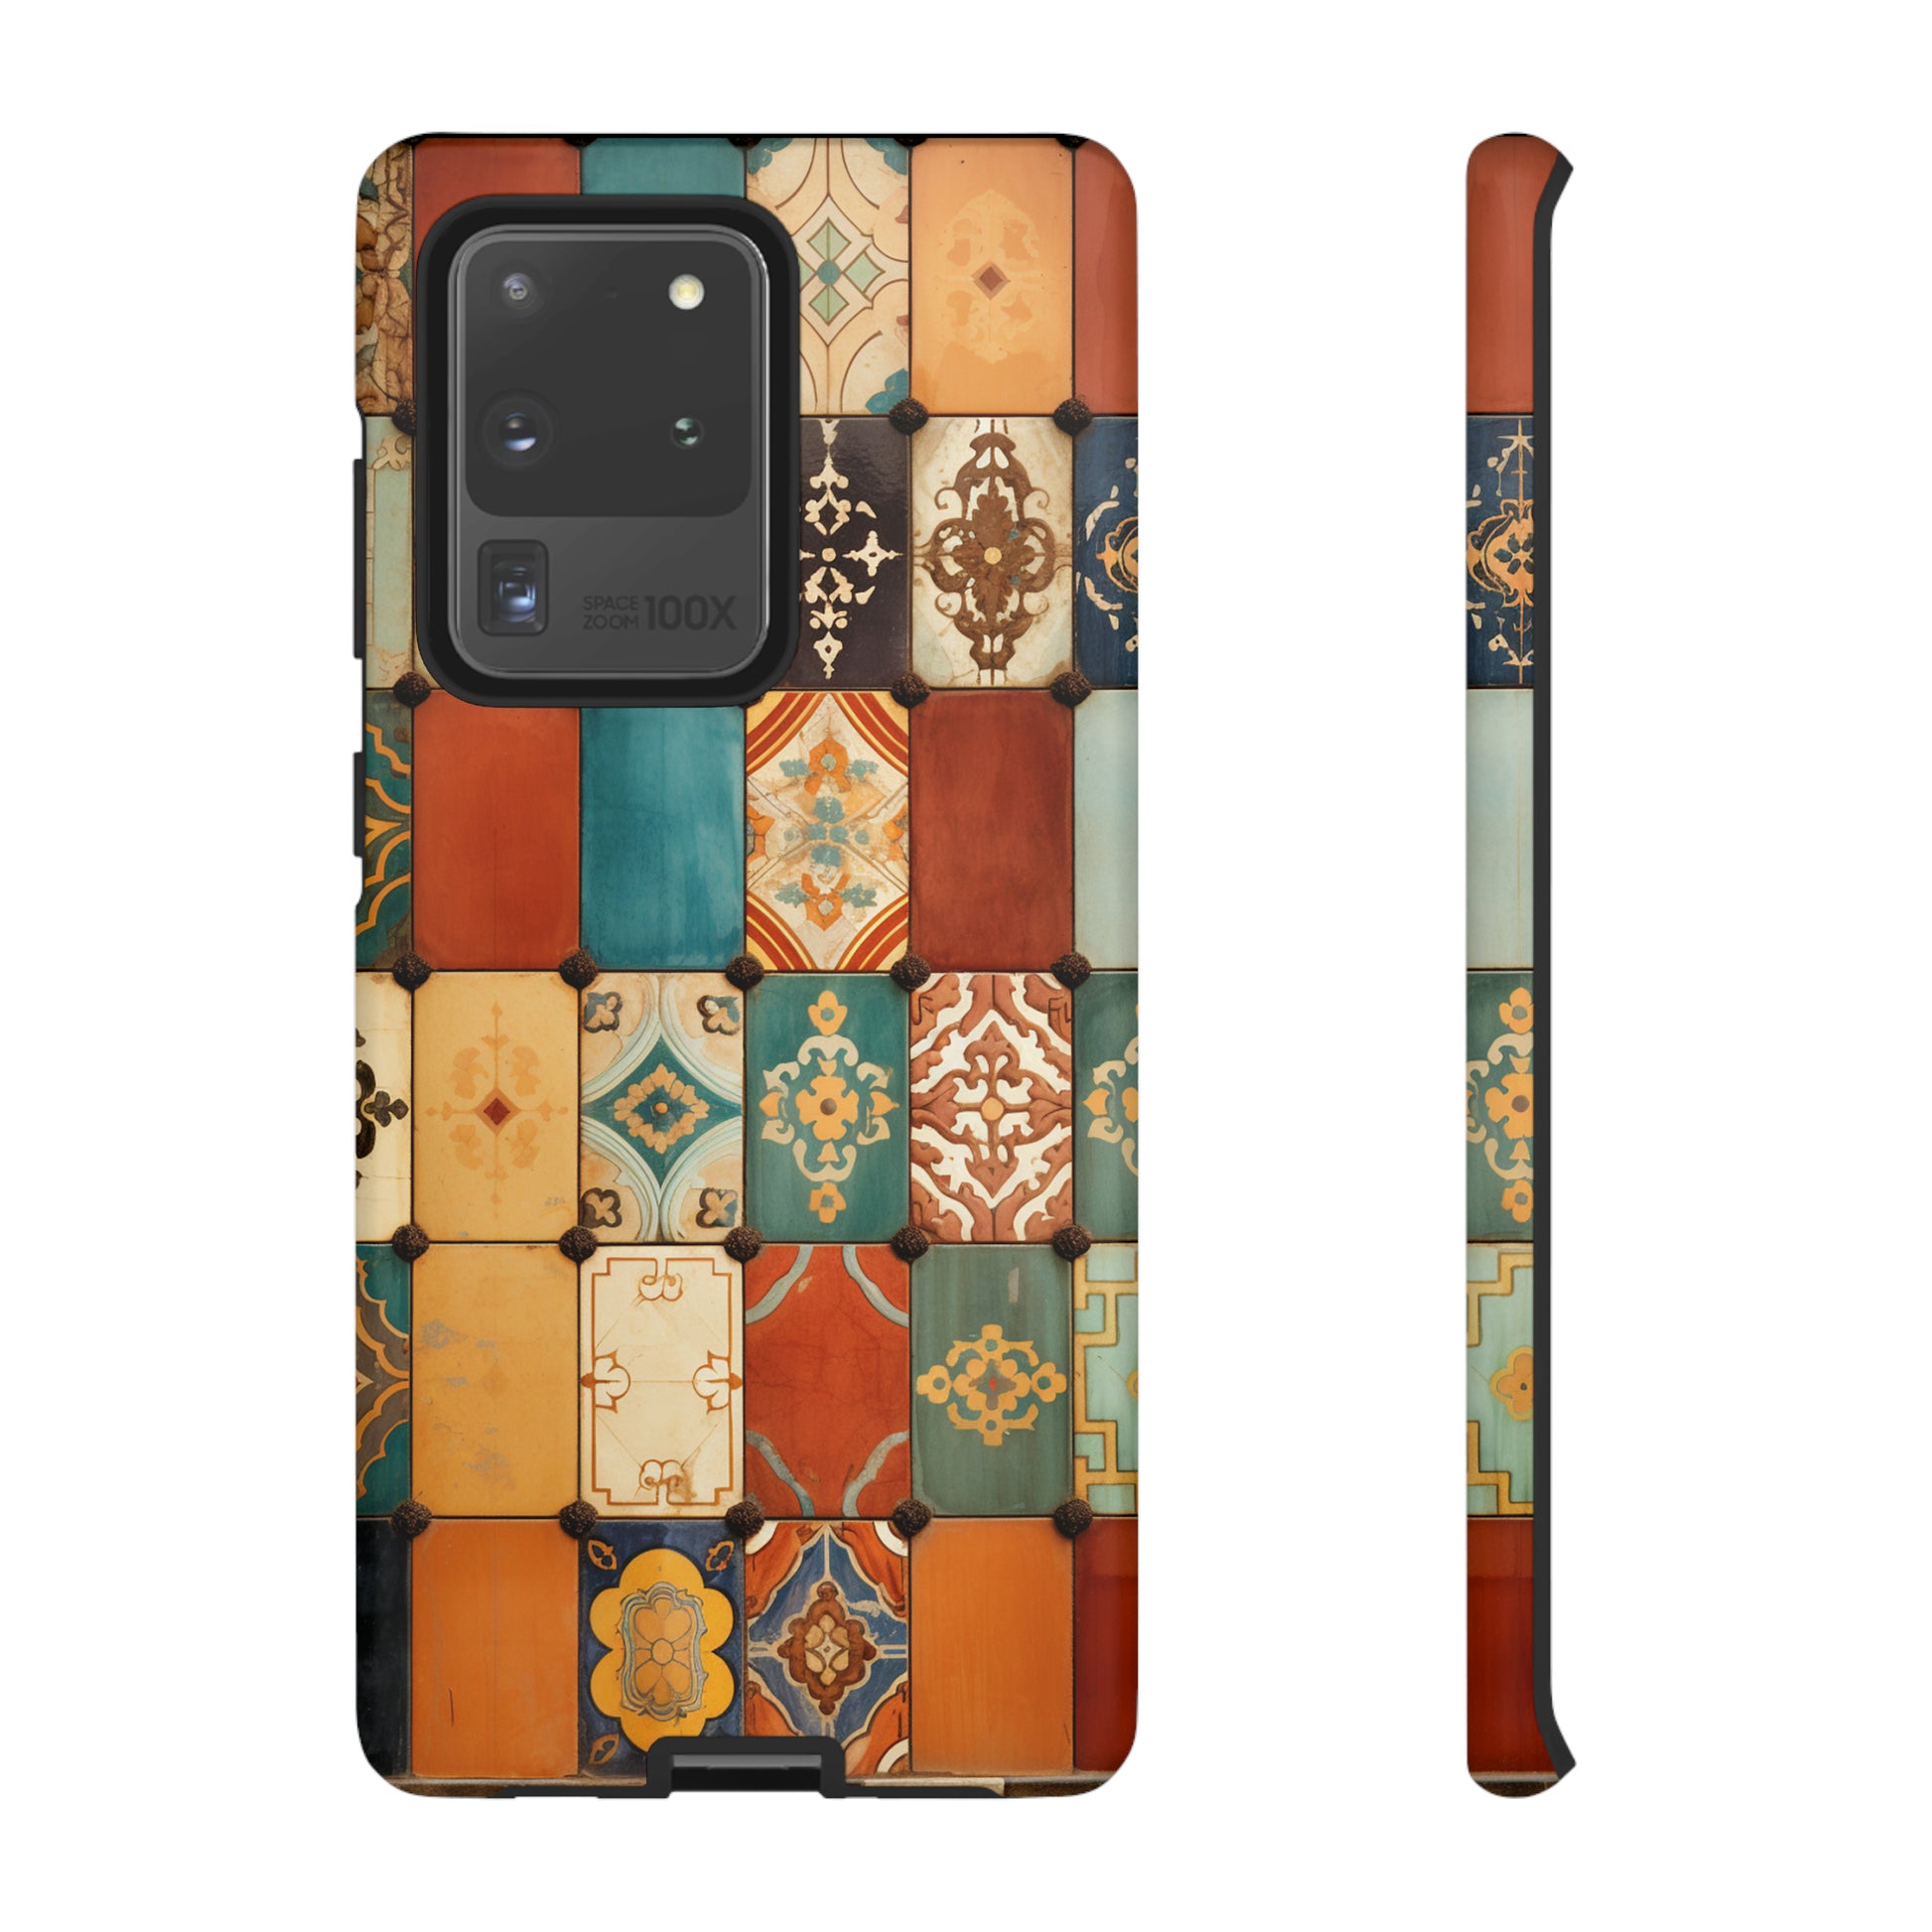 Tile art cover with Mexican culture flair for iPhone 12